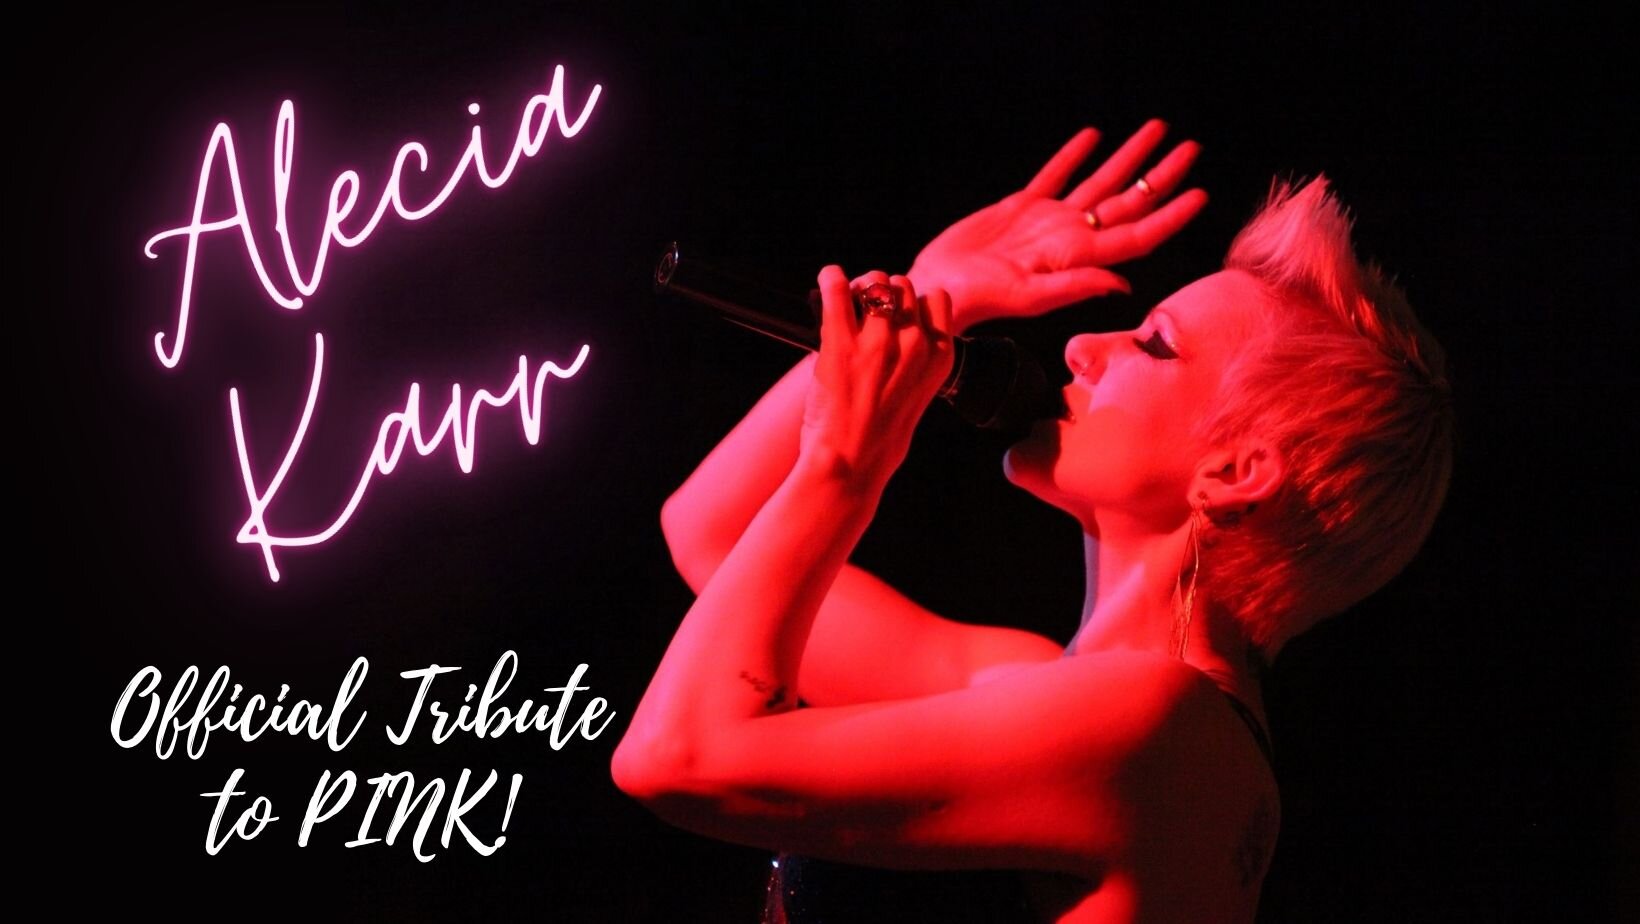 Alecia Karr the official tribute to Pink - At The Duchess of Kirkcaldy